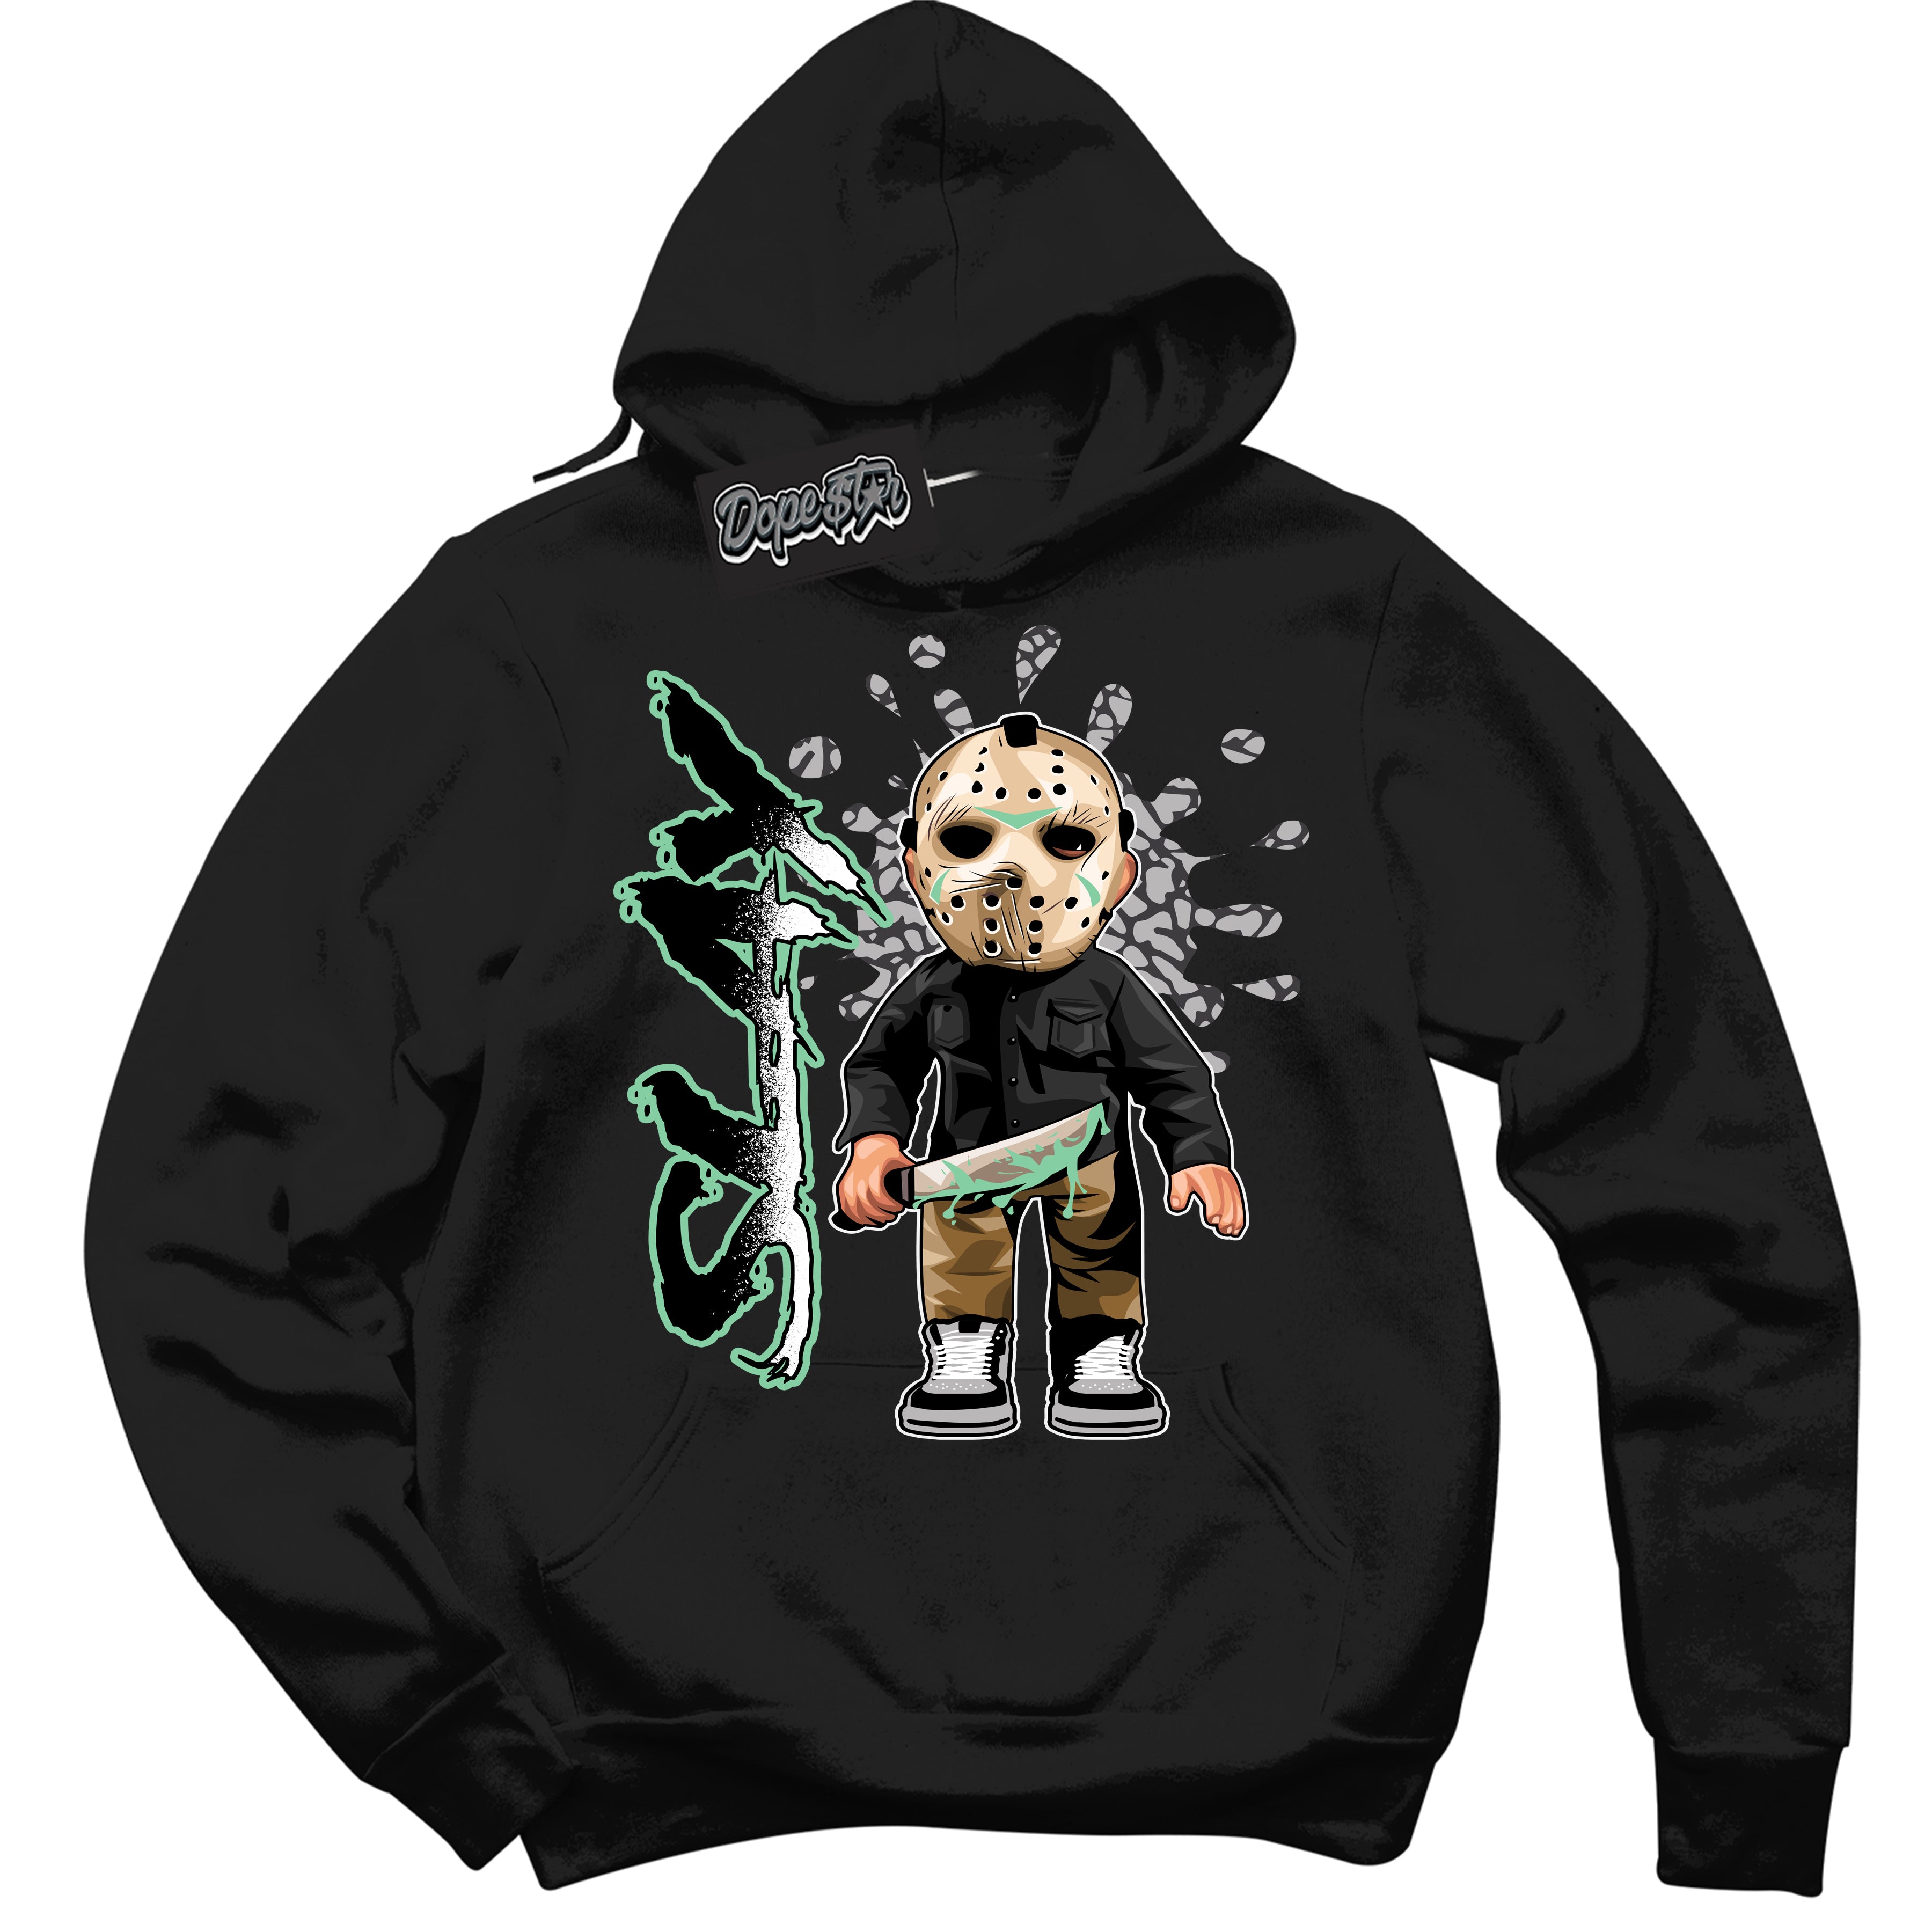 Cool Black Graphic DopeStar Hoodie with “ Slay “ print, that perfectly matches Green Glow 3S sneakers